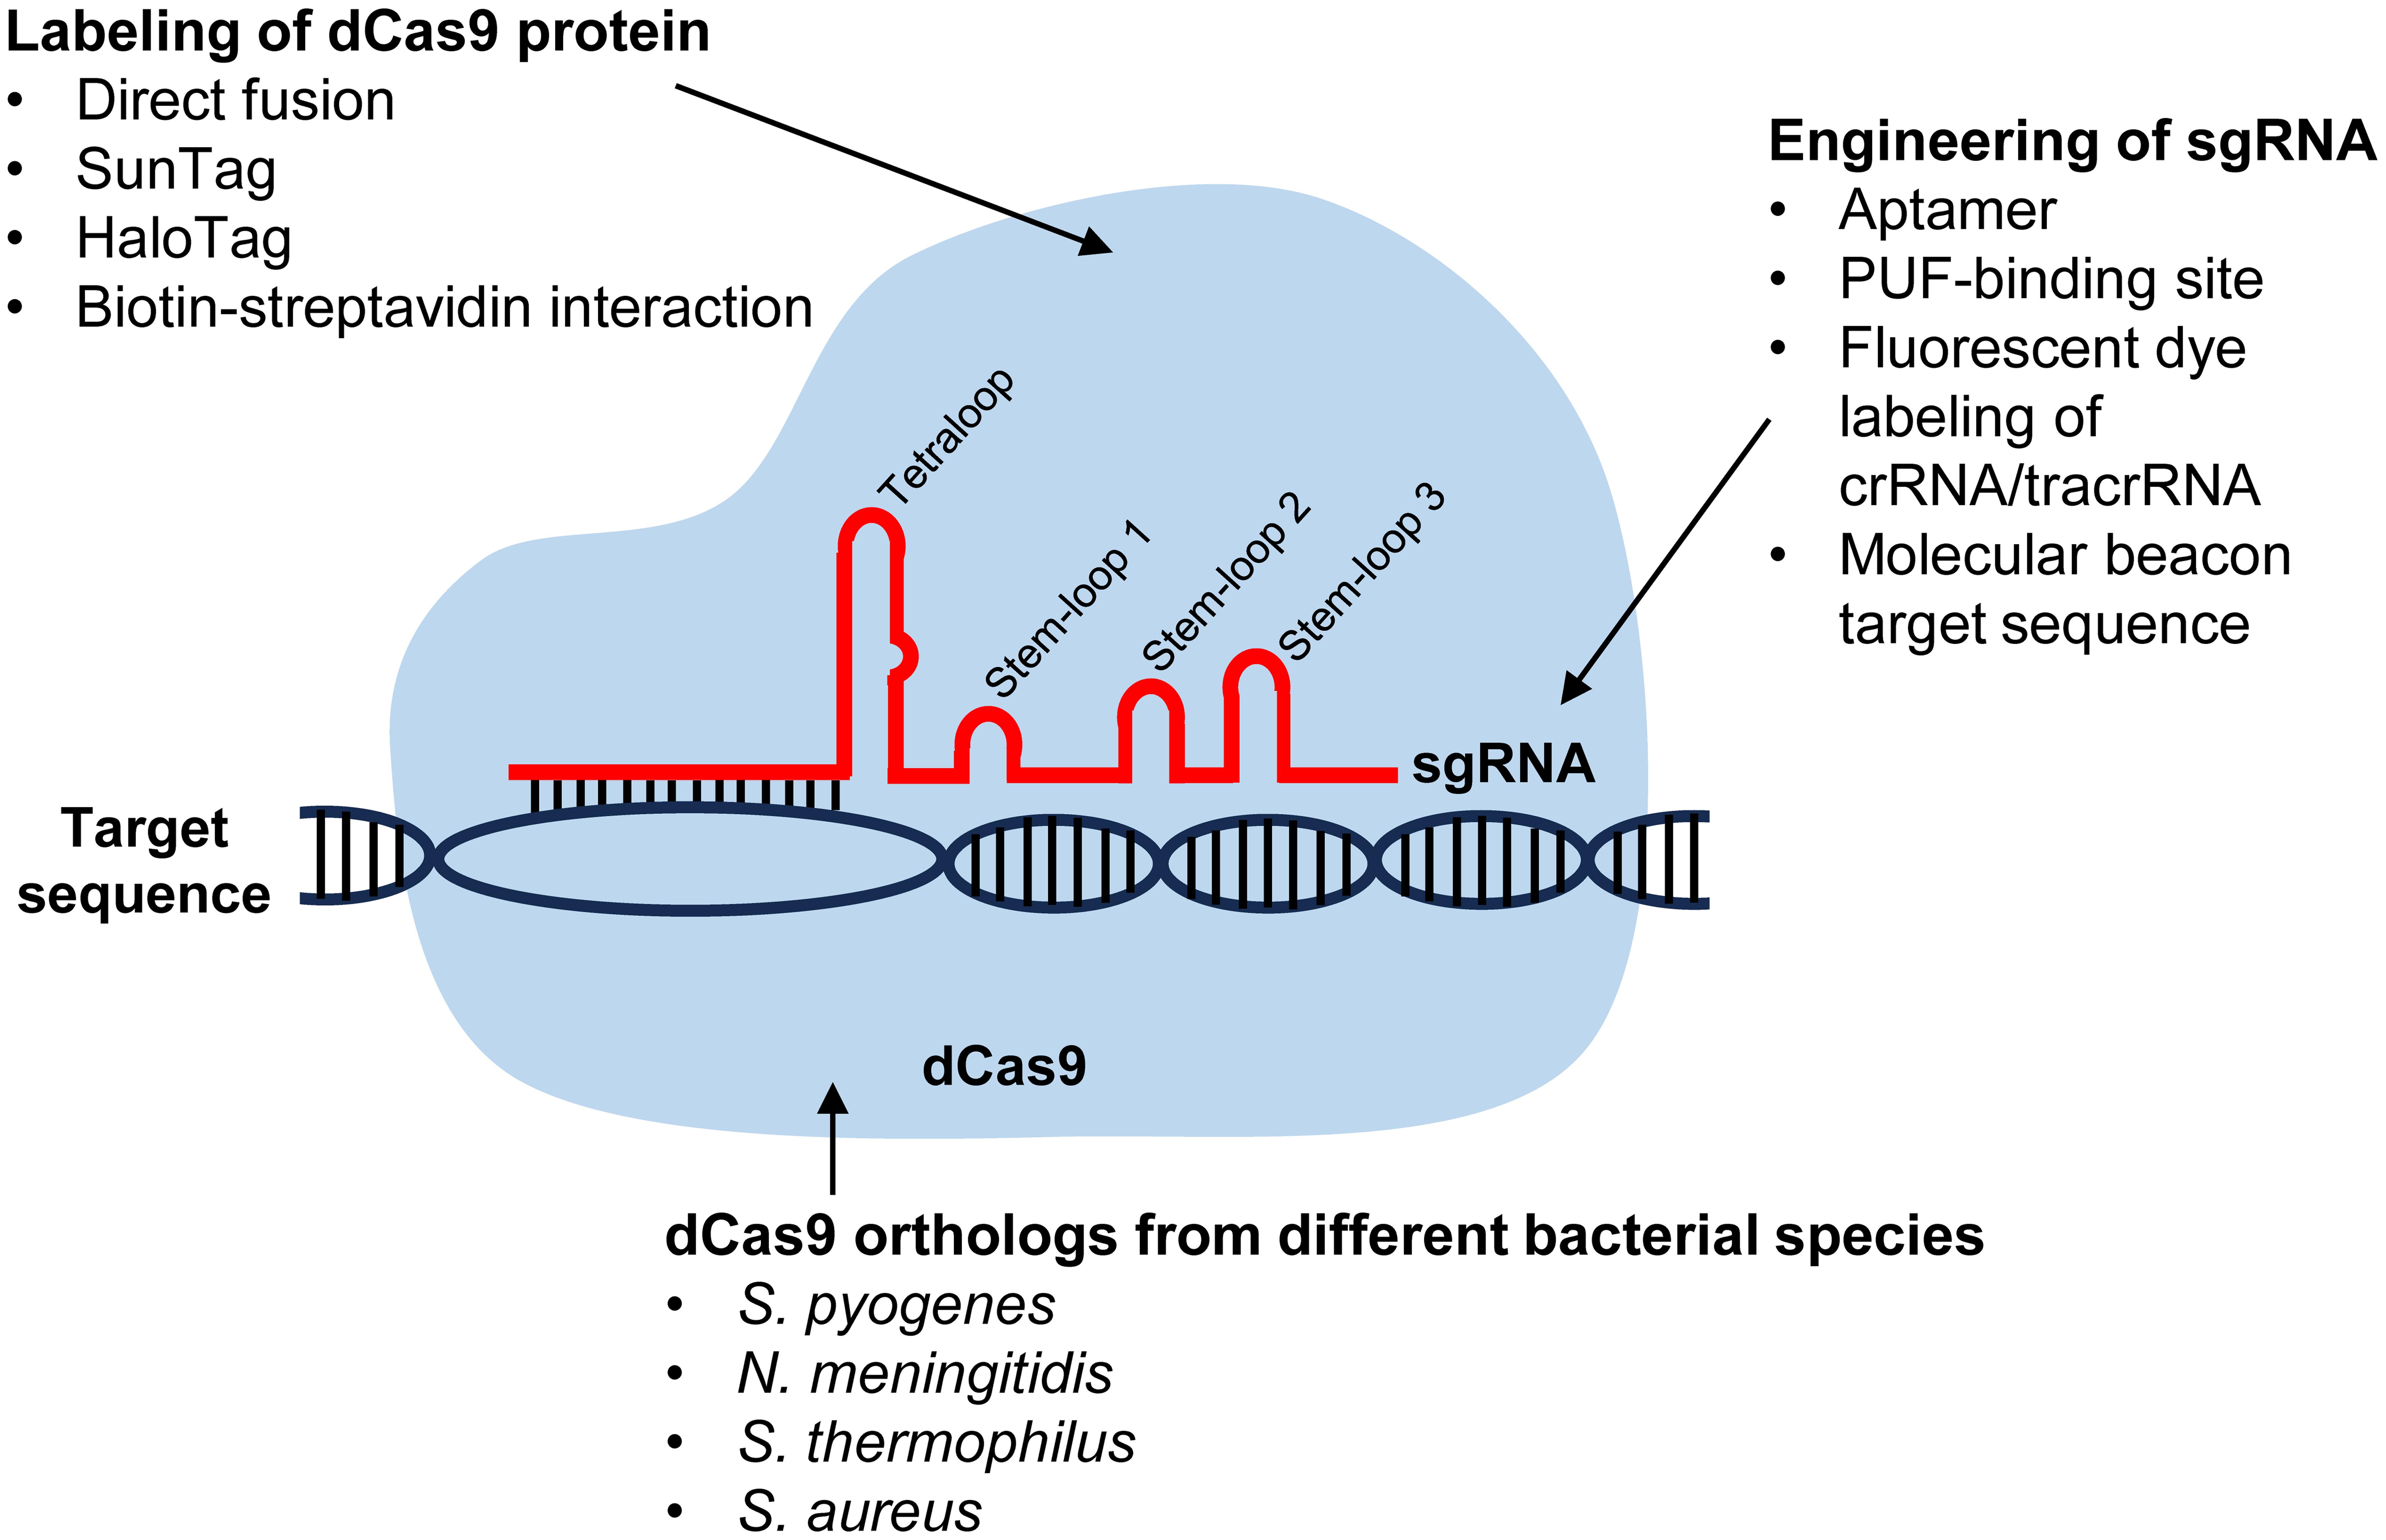 An overview of CRISPR-Cas9-mediated imaging of genomic loci in cells.